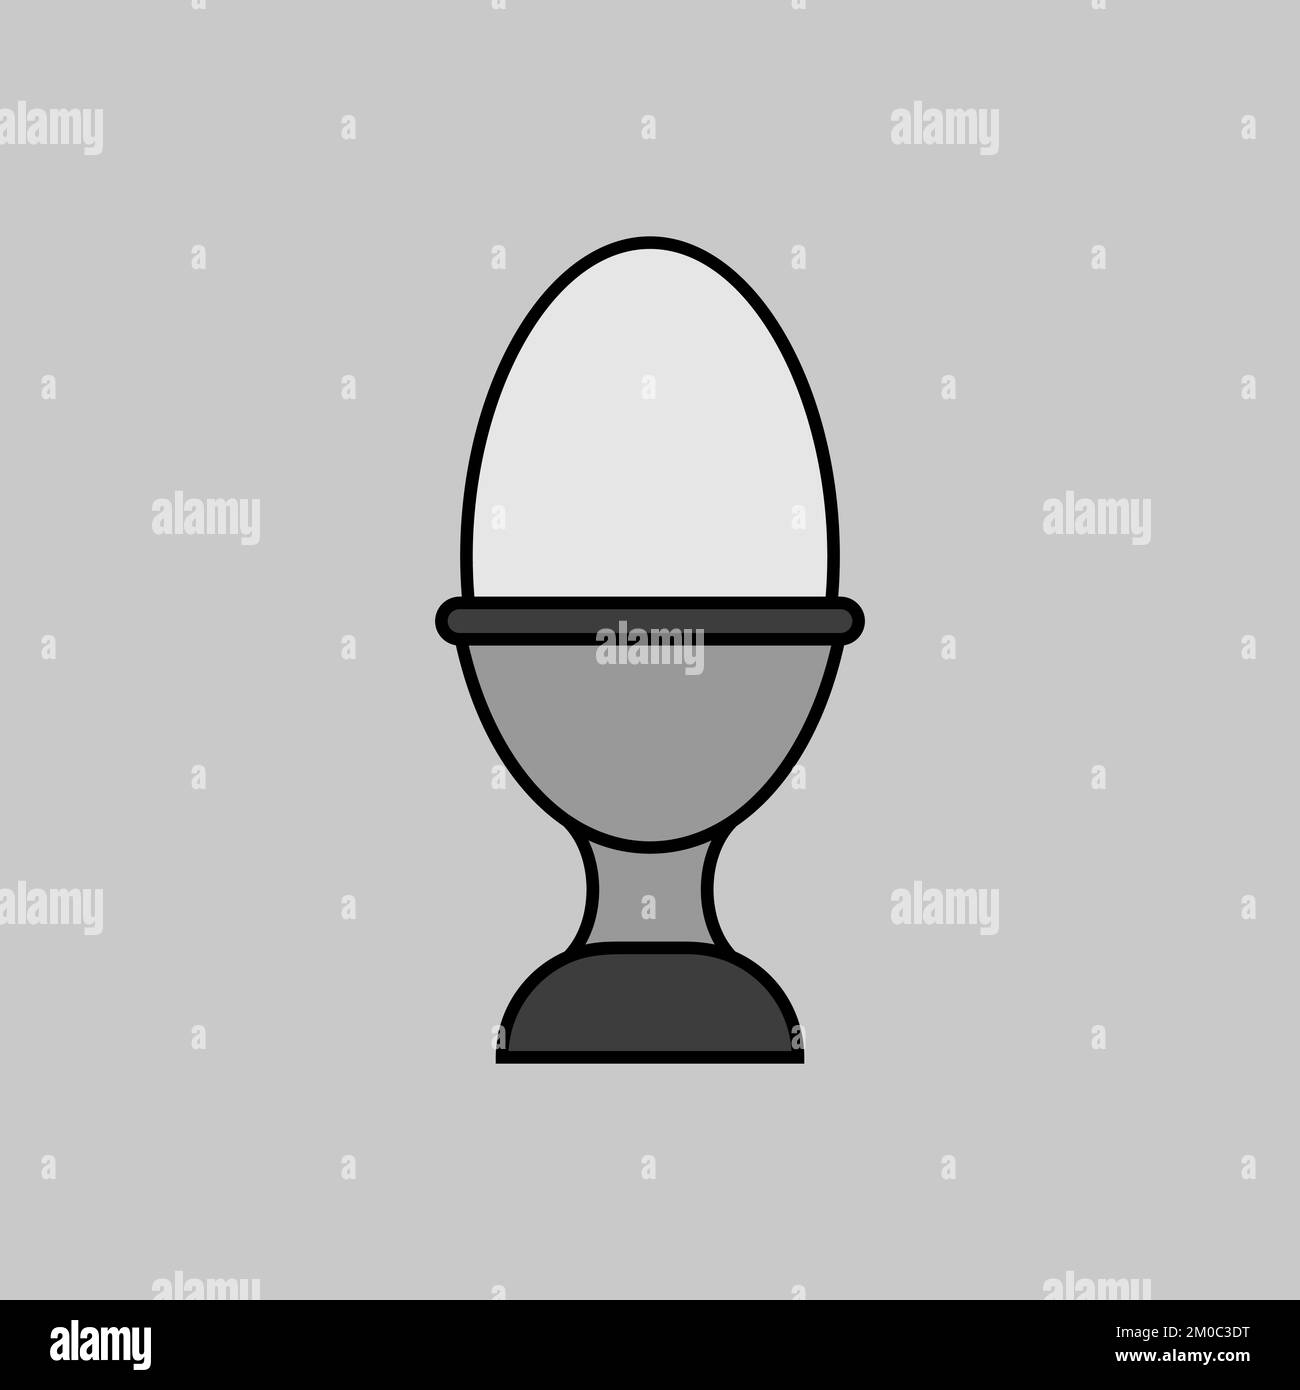 Soft boiled egg in an egg cup vector grayscale icon. Kitchen appliance. Graph symbol for cooking web site design, logo, app, UI Stock Vector